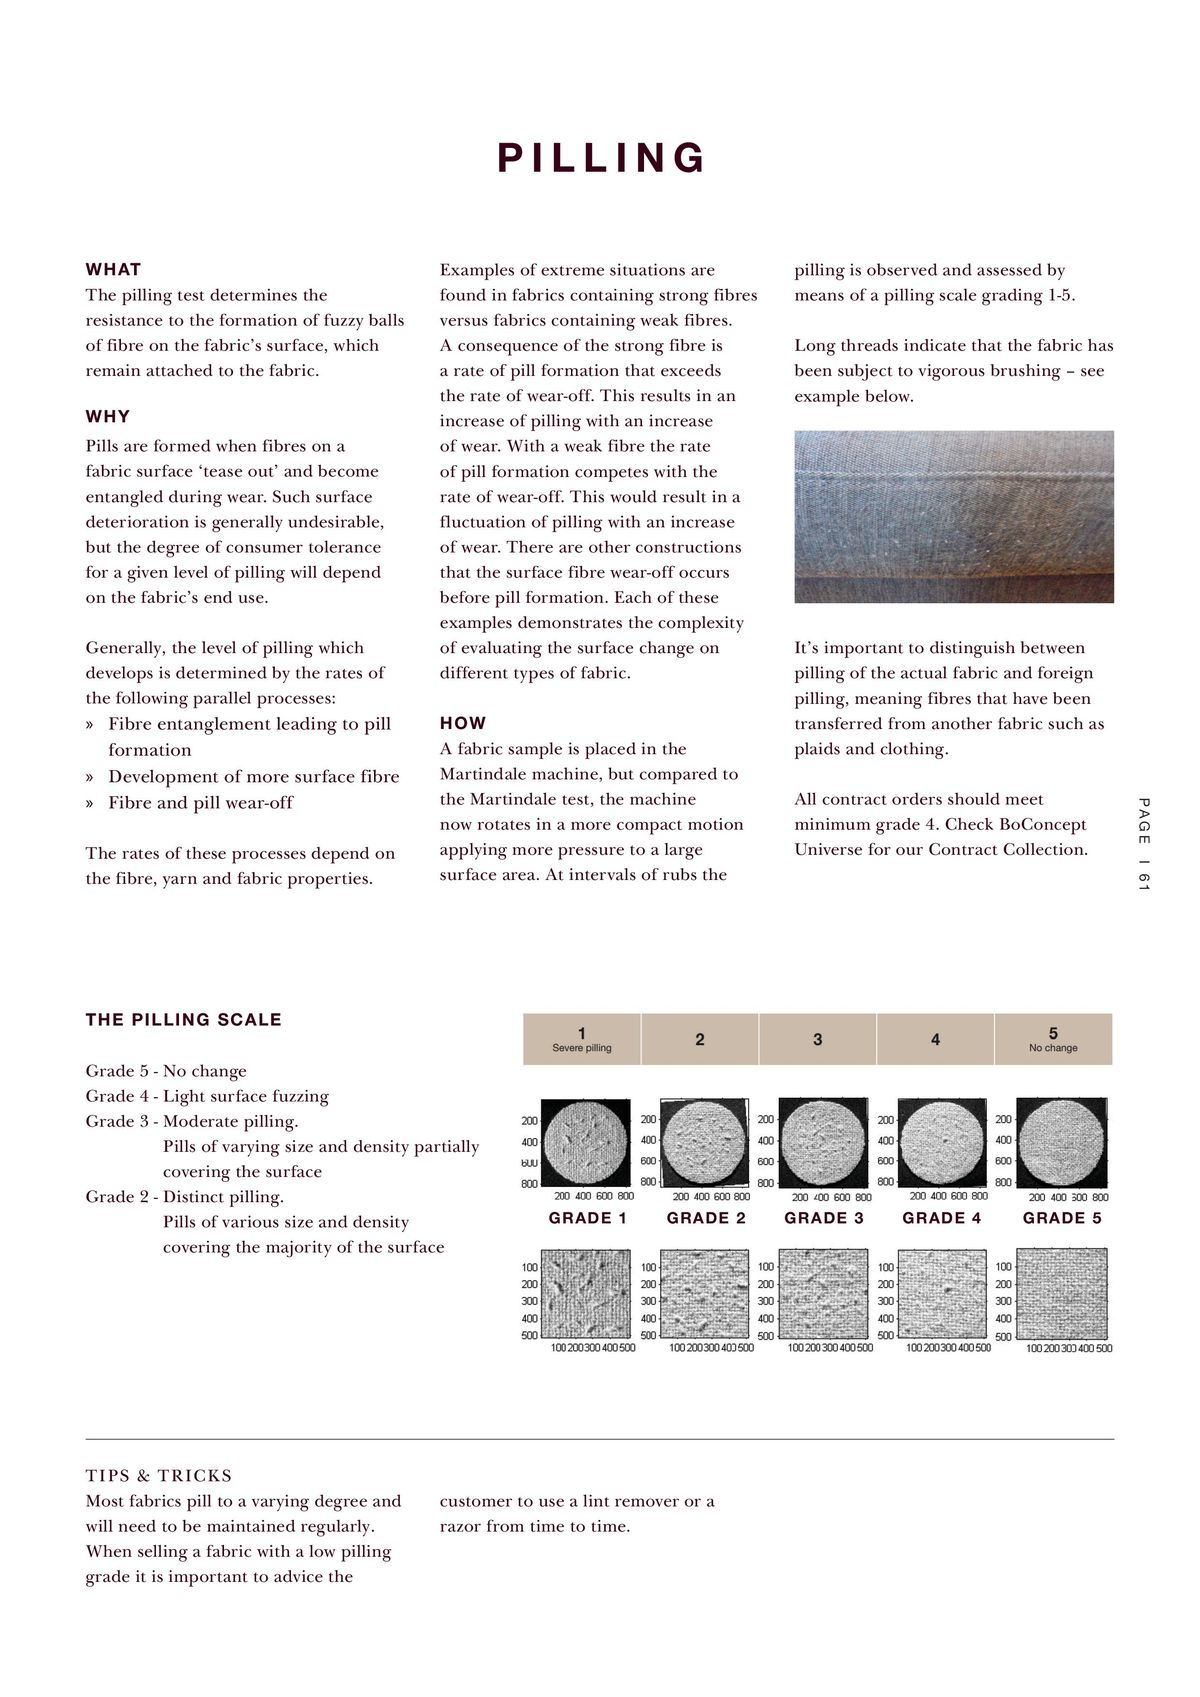 Catalogue Explore our contract materials guide, page 00061